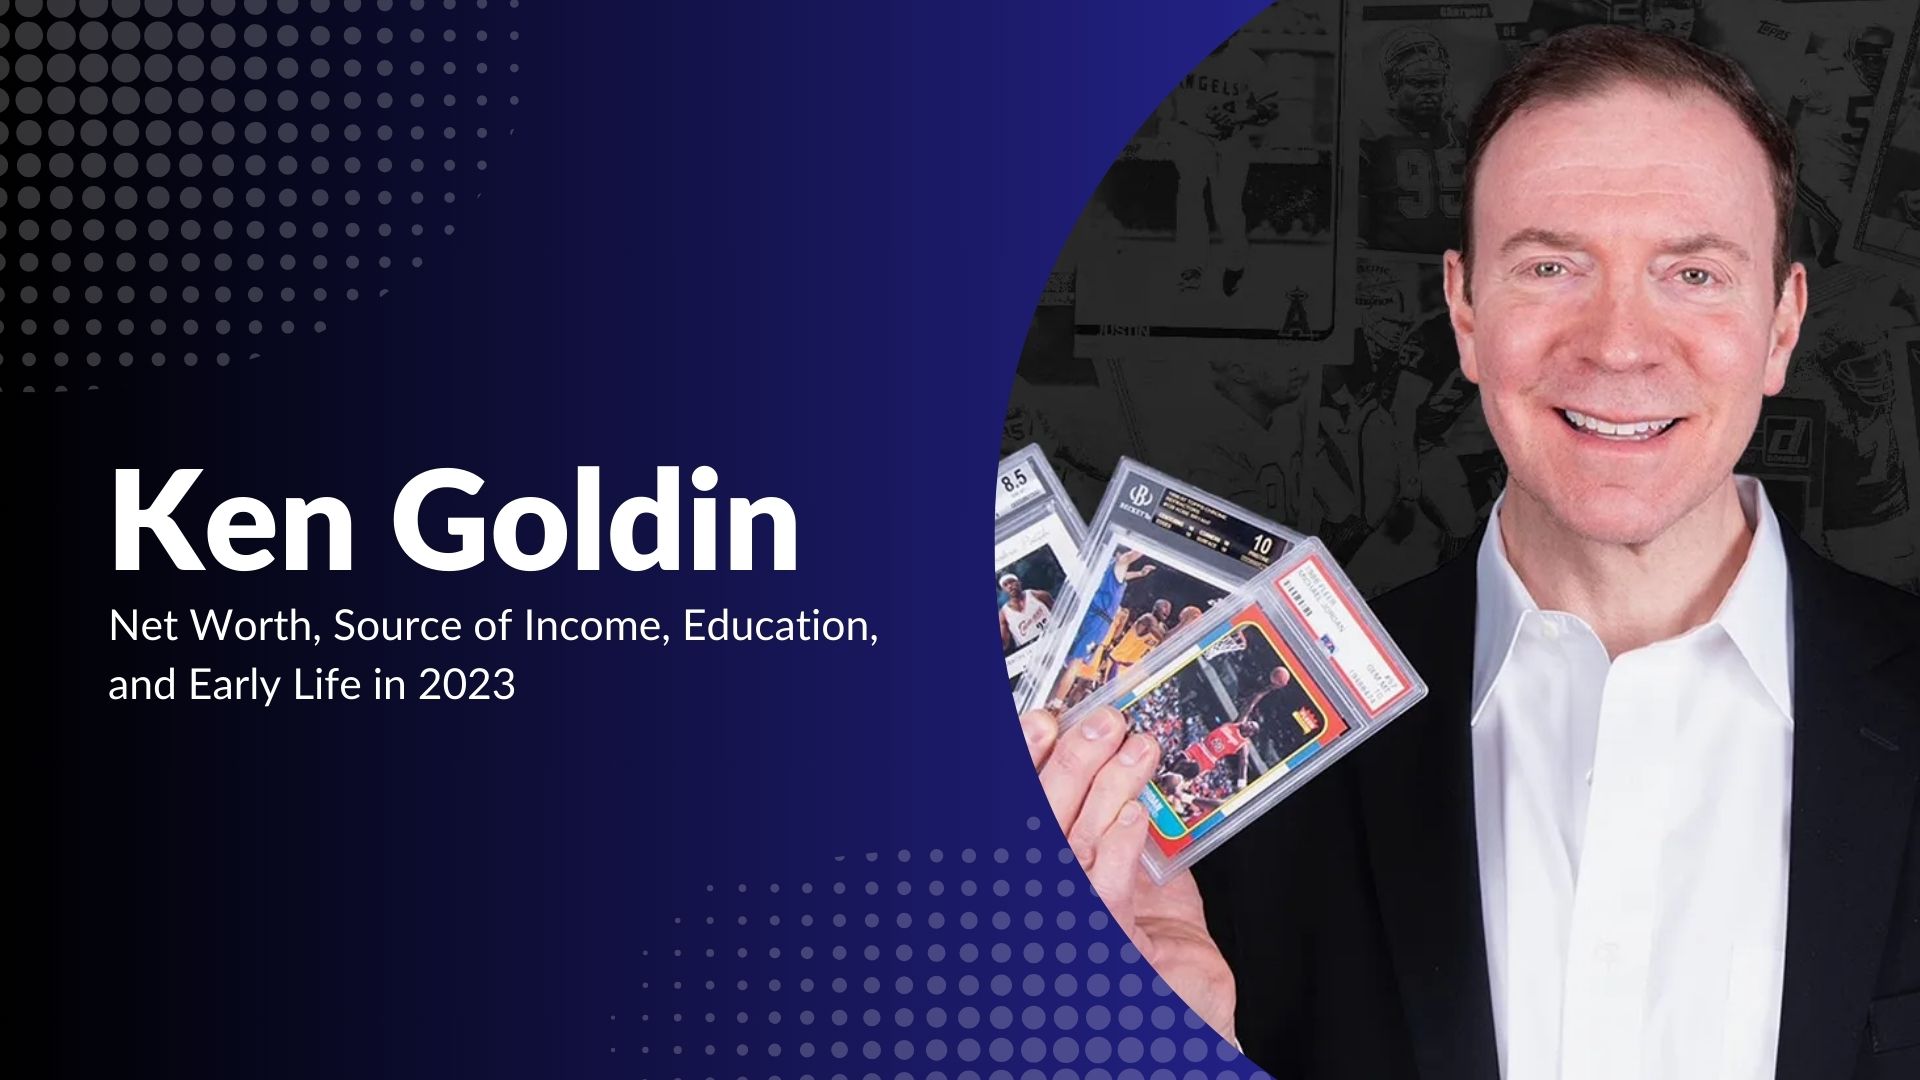 Ken Goldin Net Worth, Source of Education, and Early Life in 2023